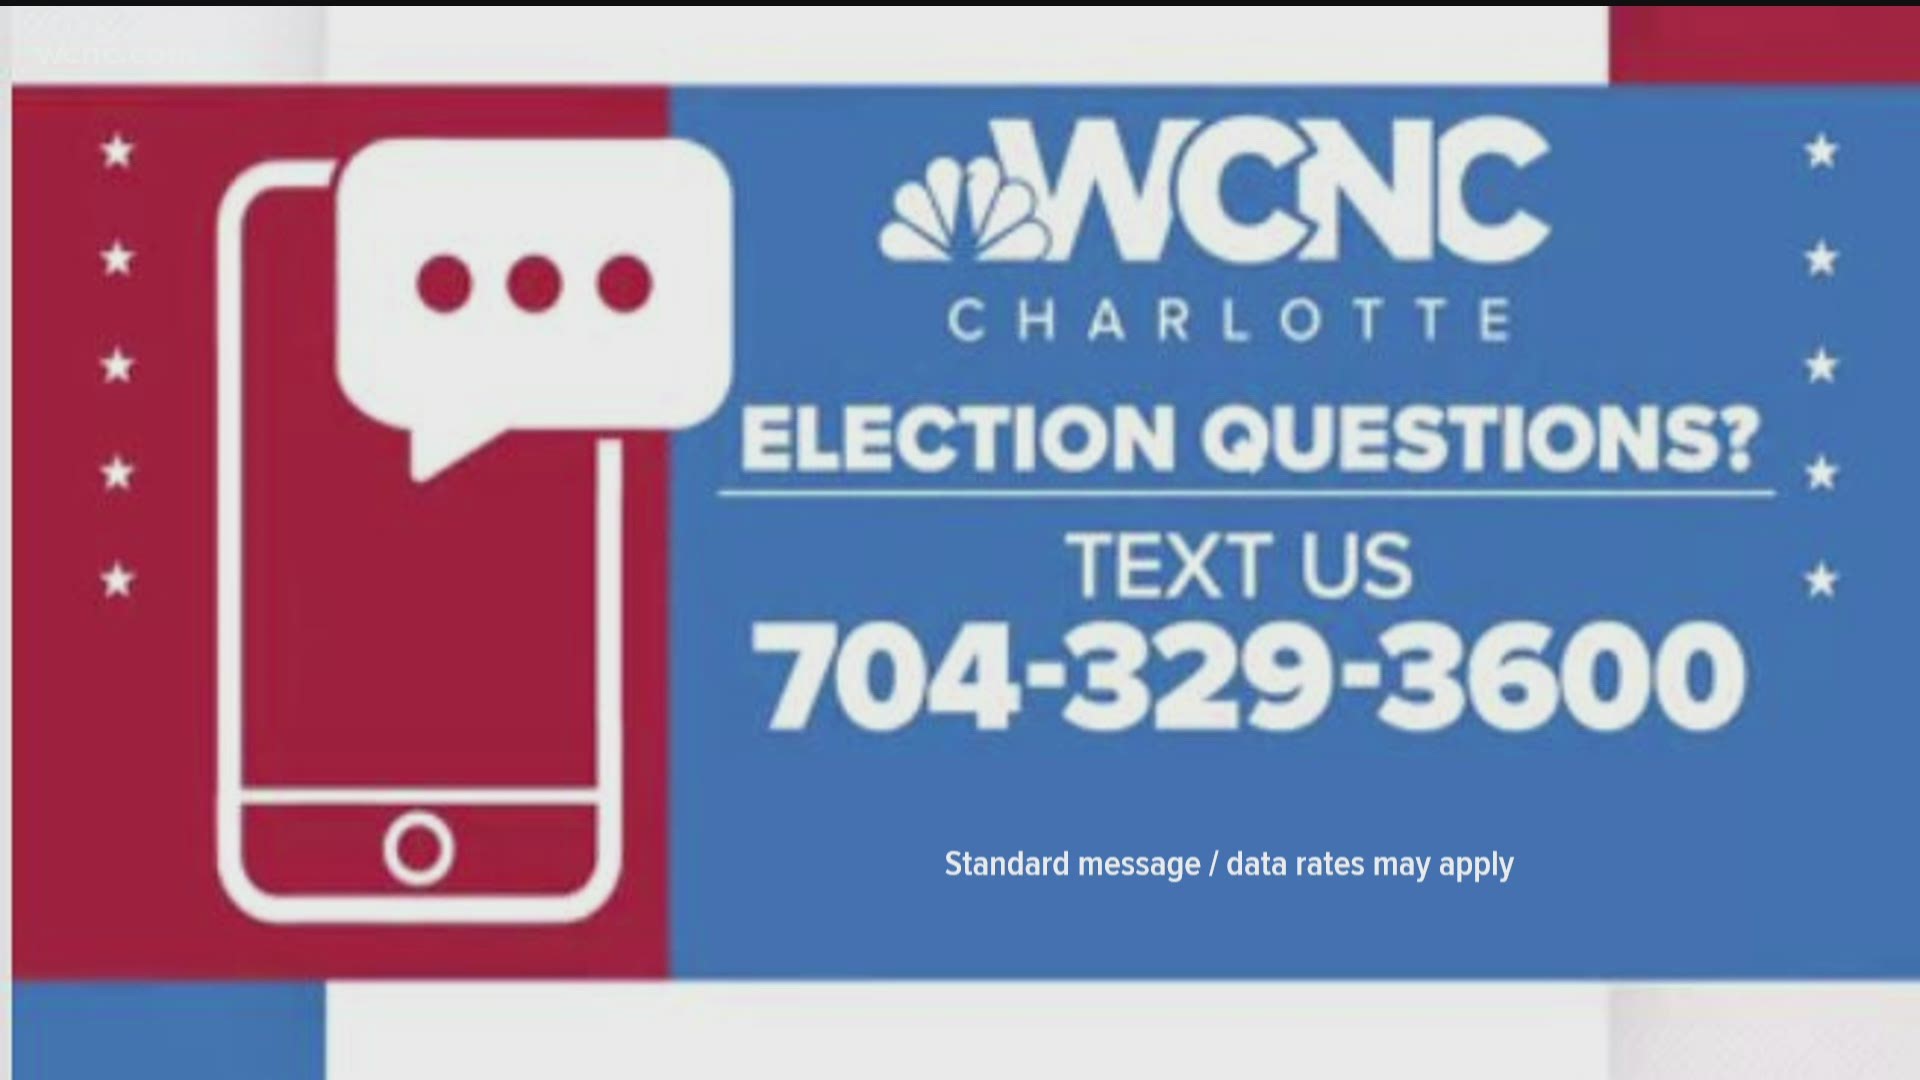 There are lots of questions surrounding the election and how and where to vote. Text election questions to 704-329-3600.